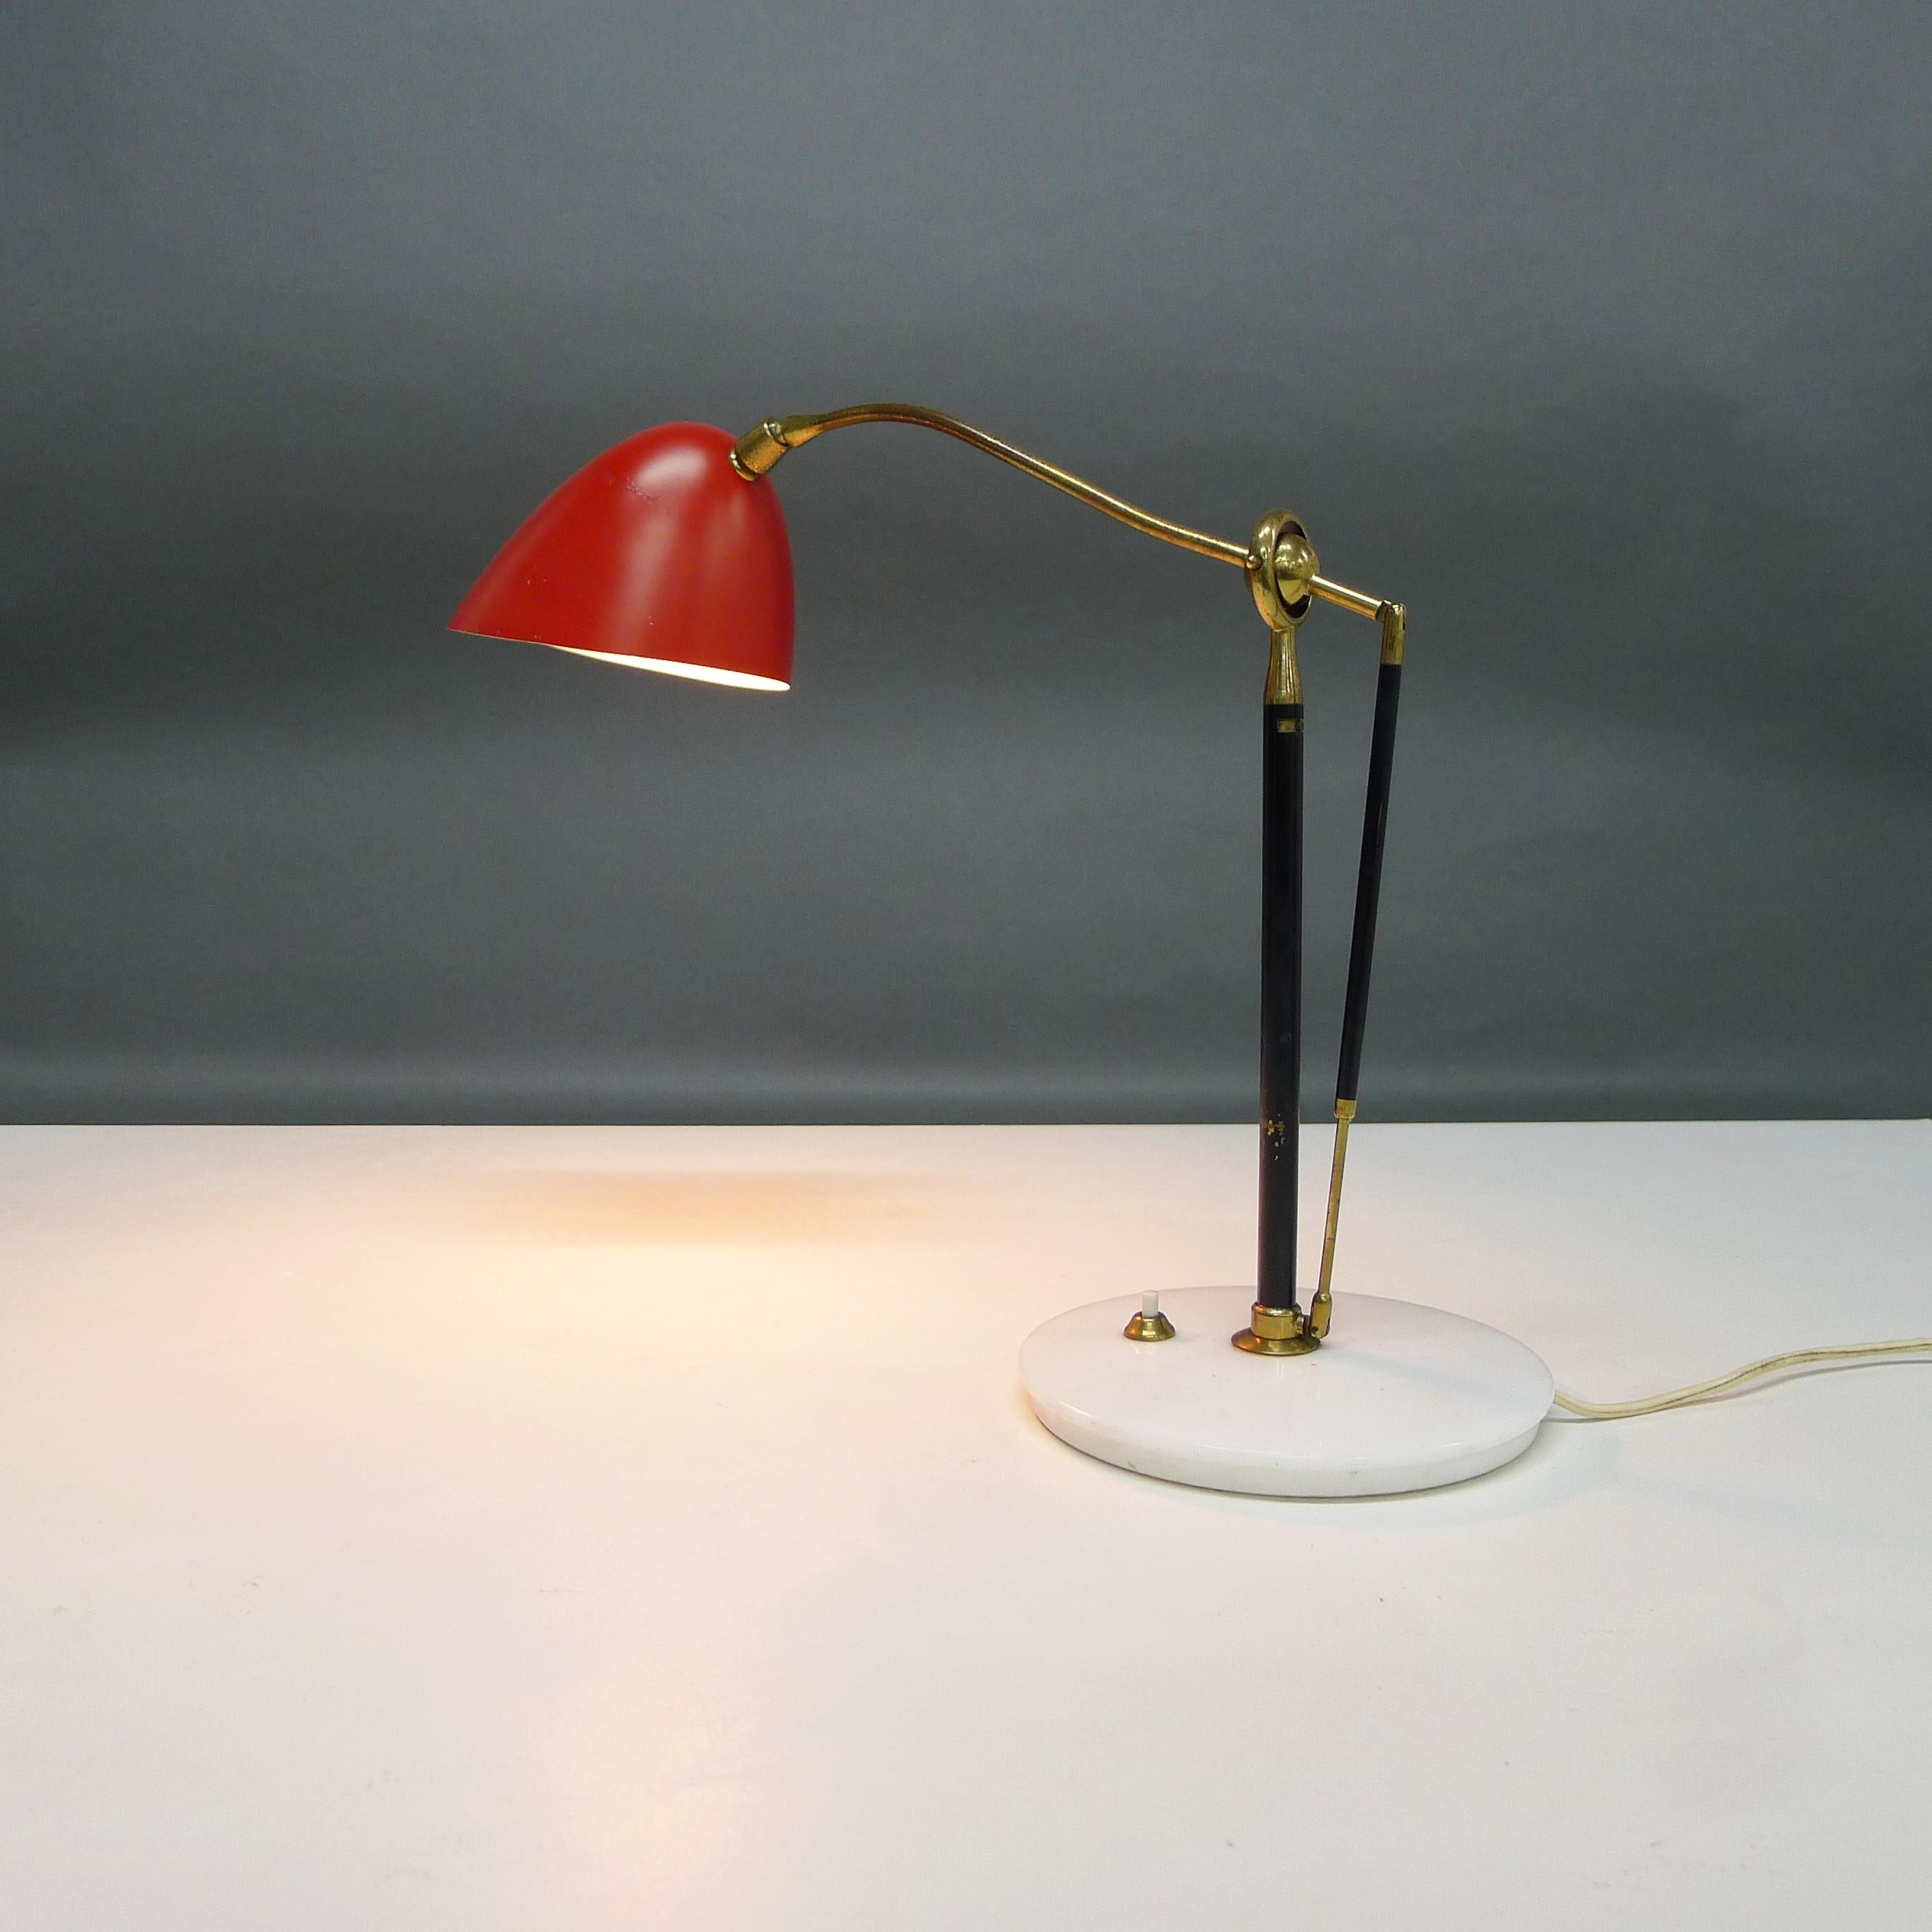 Rare adjustable table lamp, model no. 12401, designed by Angelo Lelii circa 1952 and manufactured by Arredoluce, Monza, Italy.

Marble base, with lacquered and polished brass stem connected to a telescopic tie-rod by a ball joint, which allows the